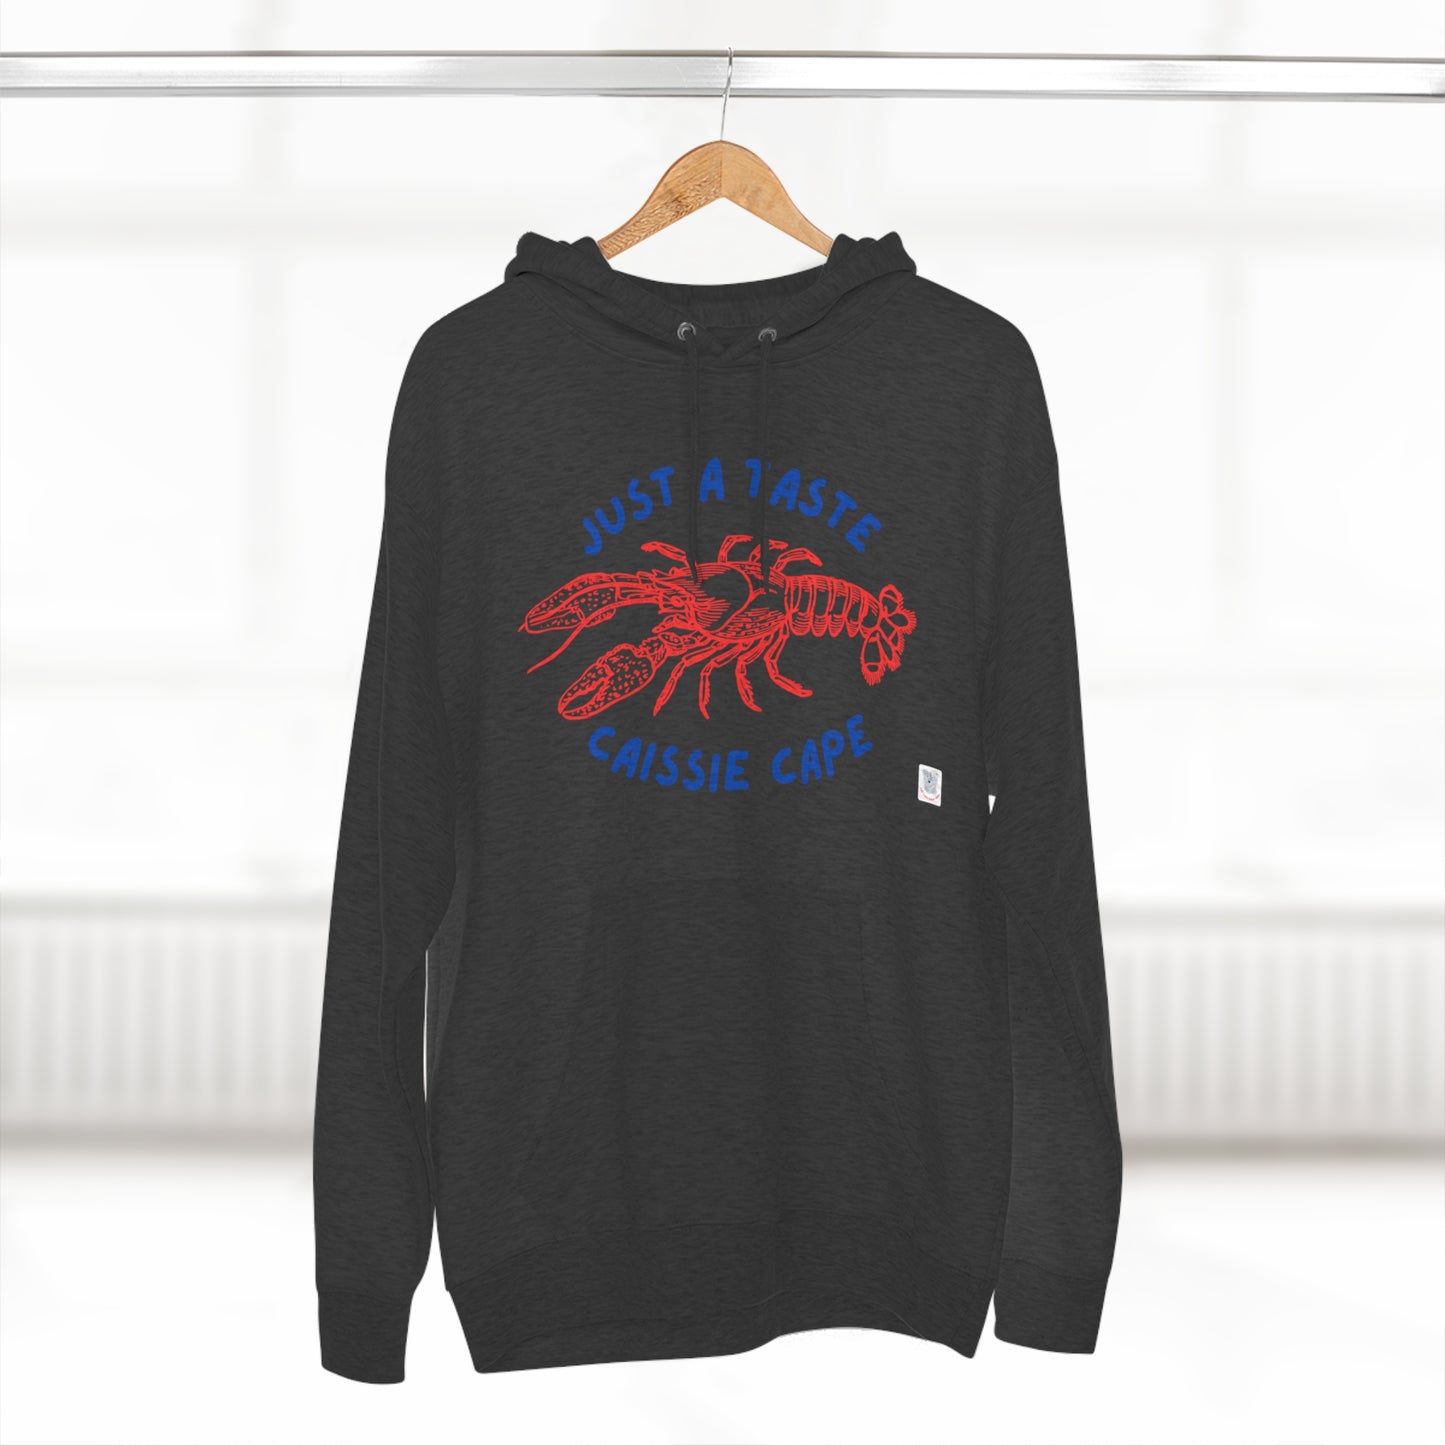 Caissie Cape New Brunswick Pullover Hoodie